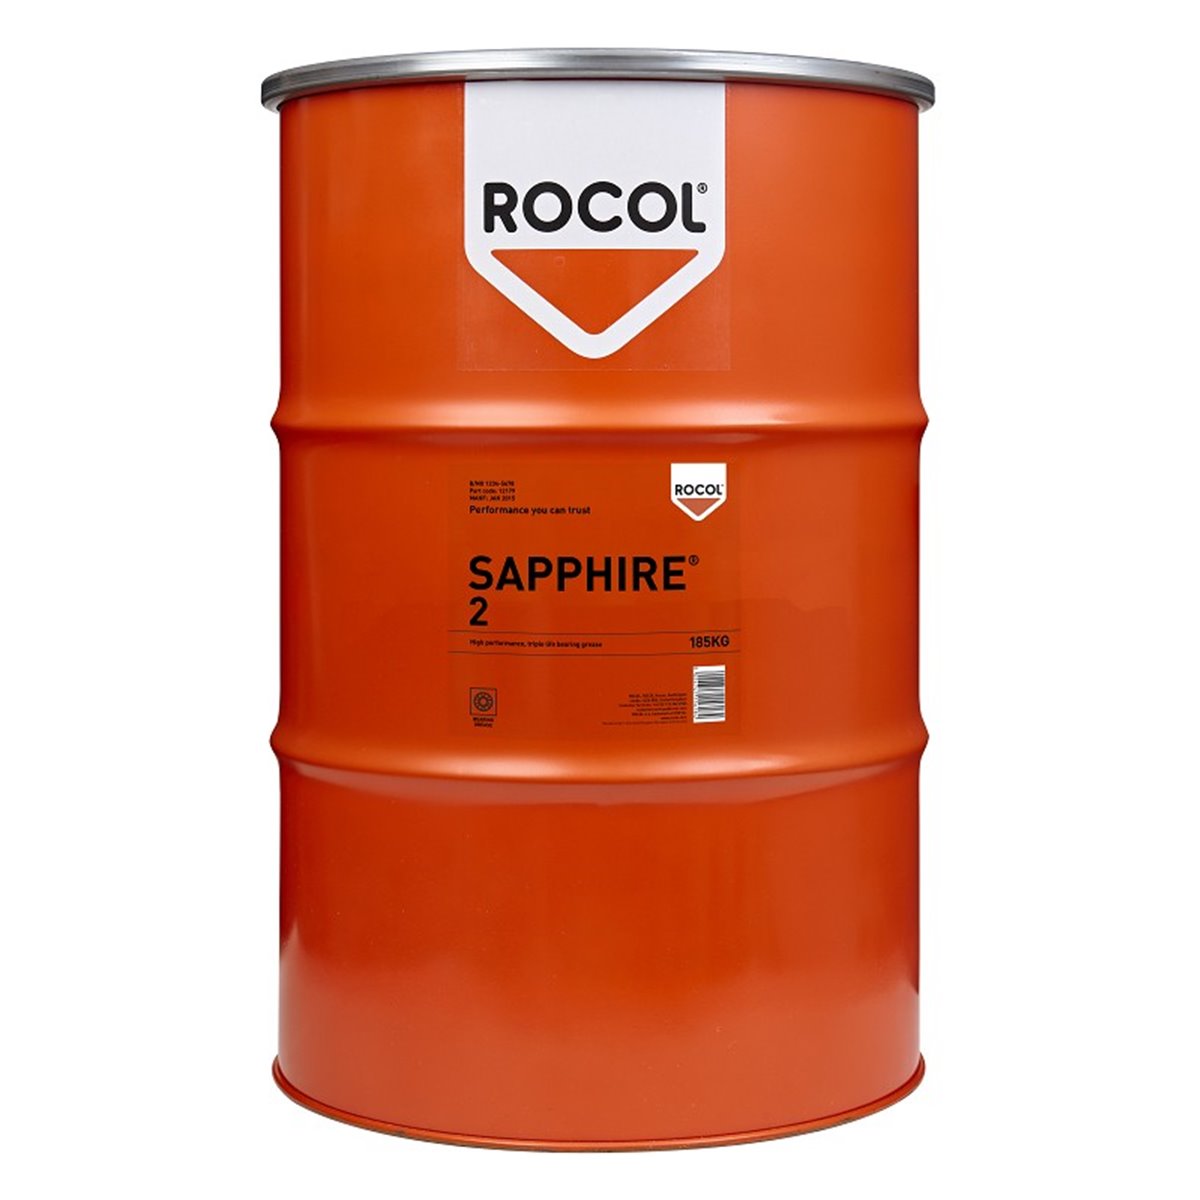 SAPPHIRE 2 BEARING GREASE Rocol 185kg RS12179